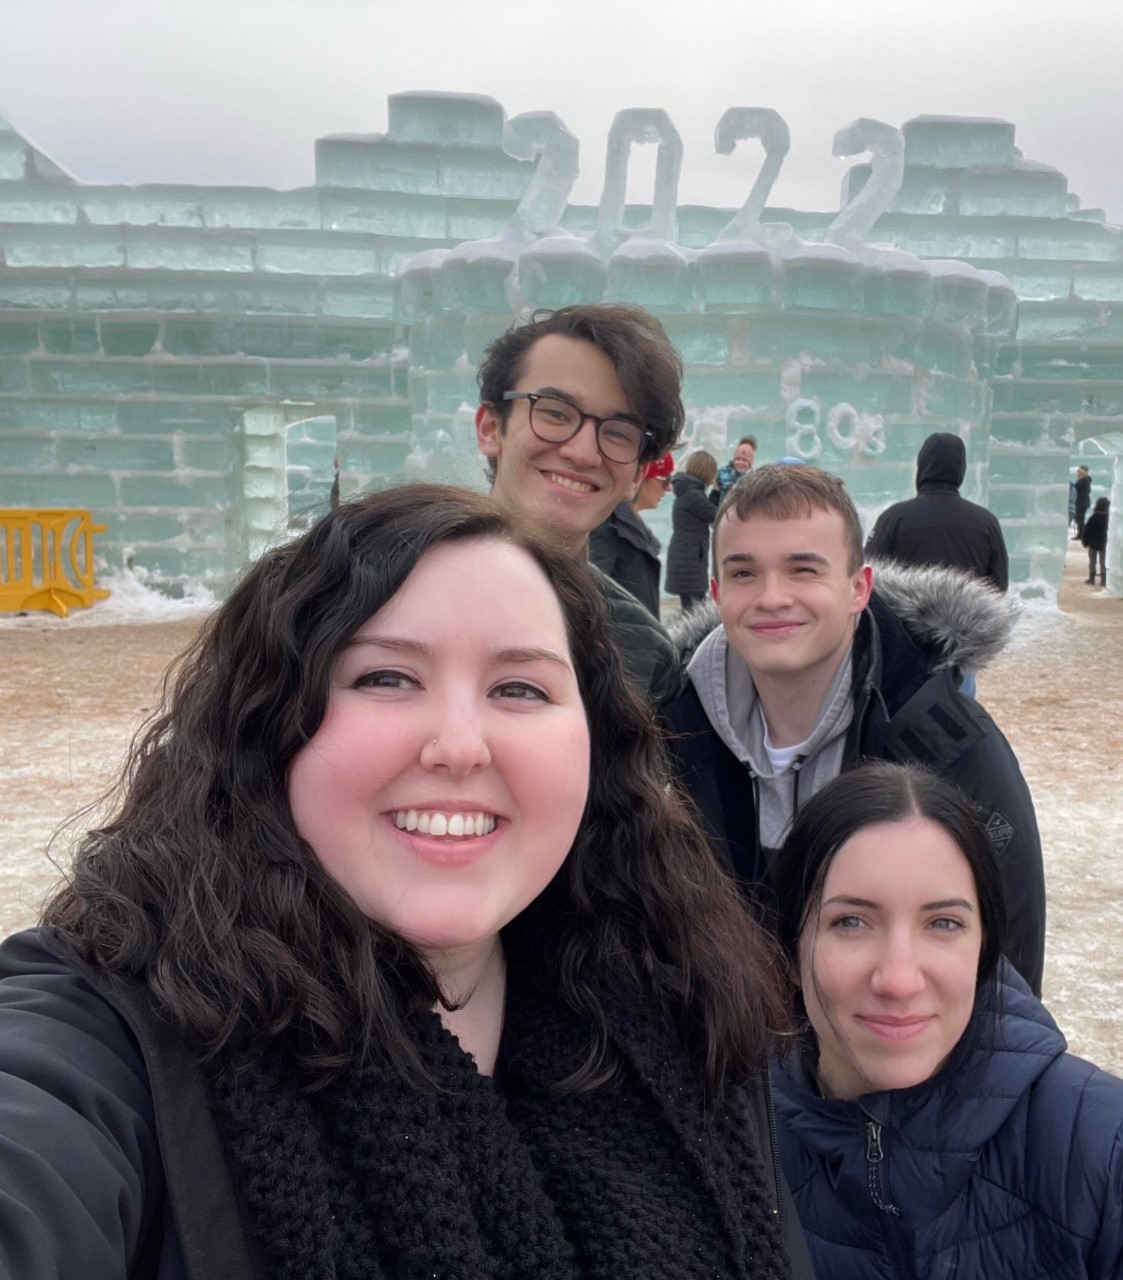 Students from the Rad Tech Class of 2022 take a selfie at the Ice Palace.